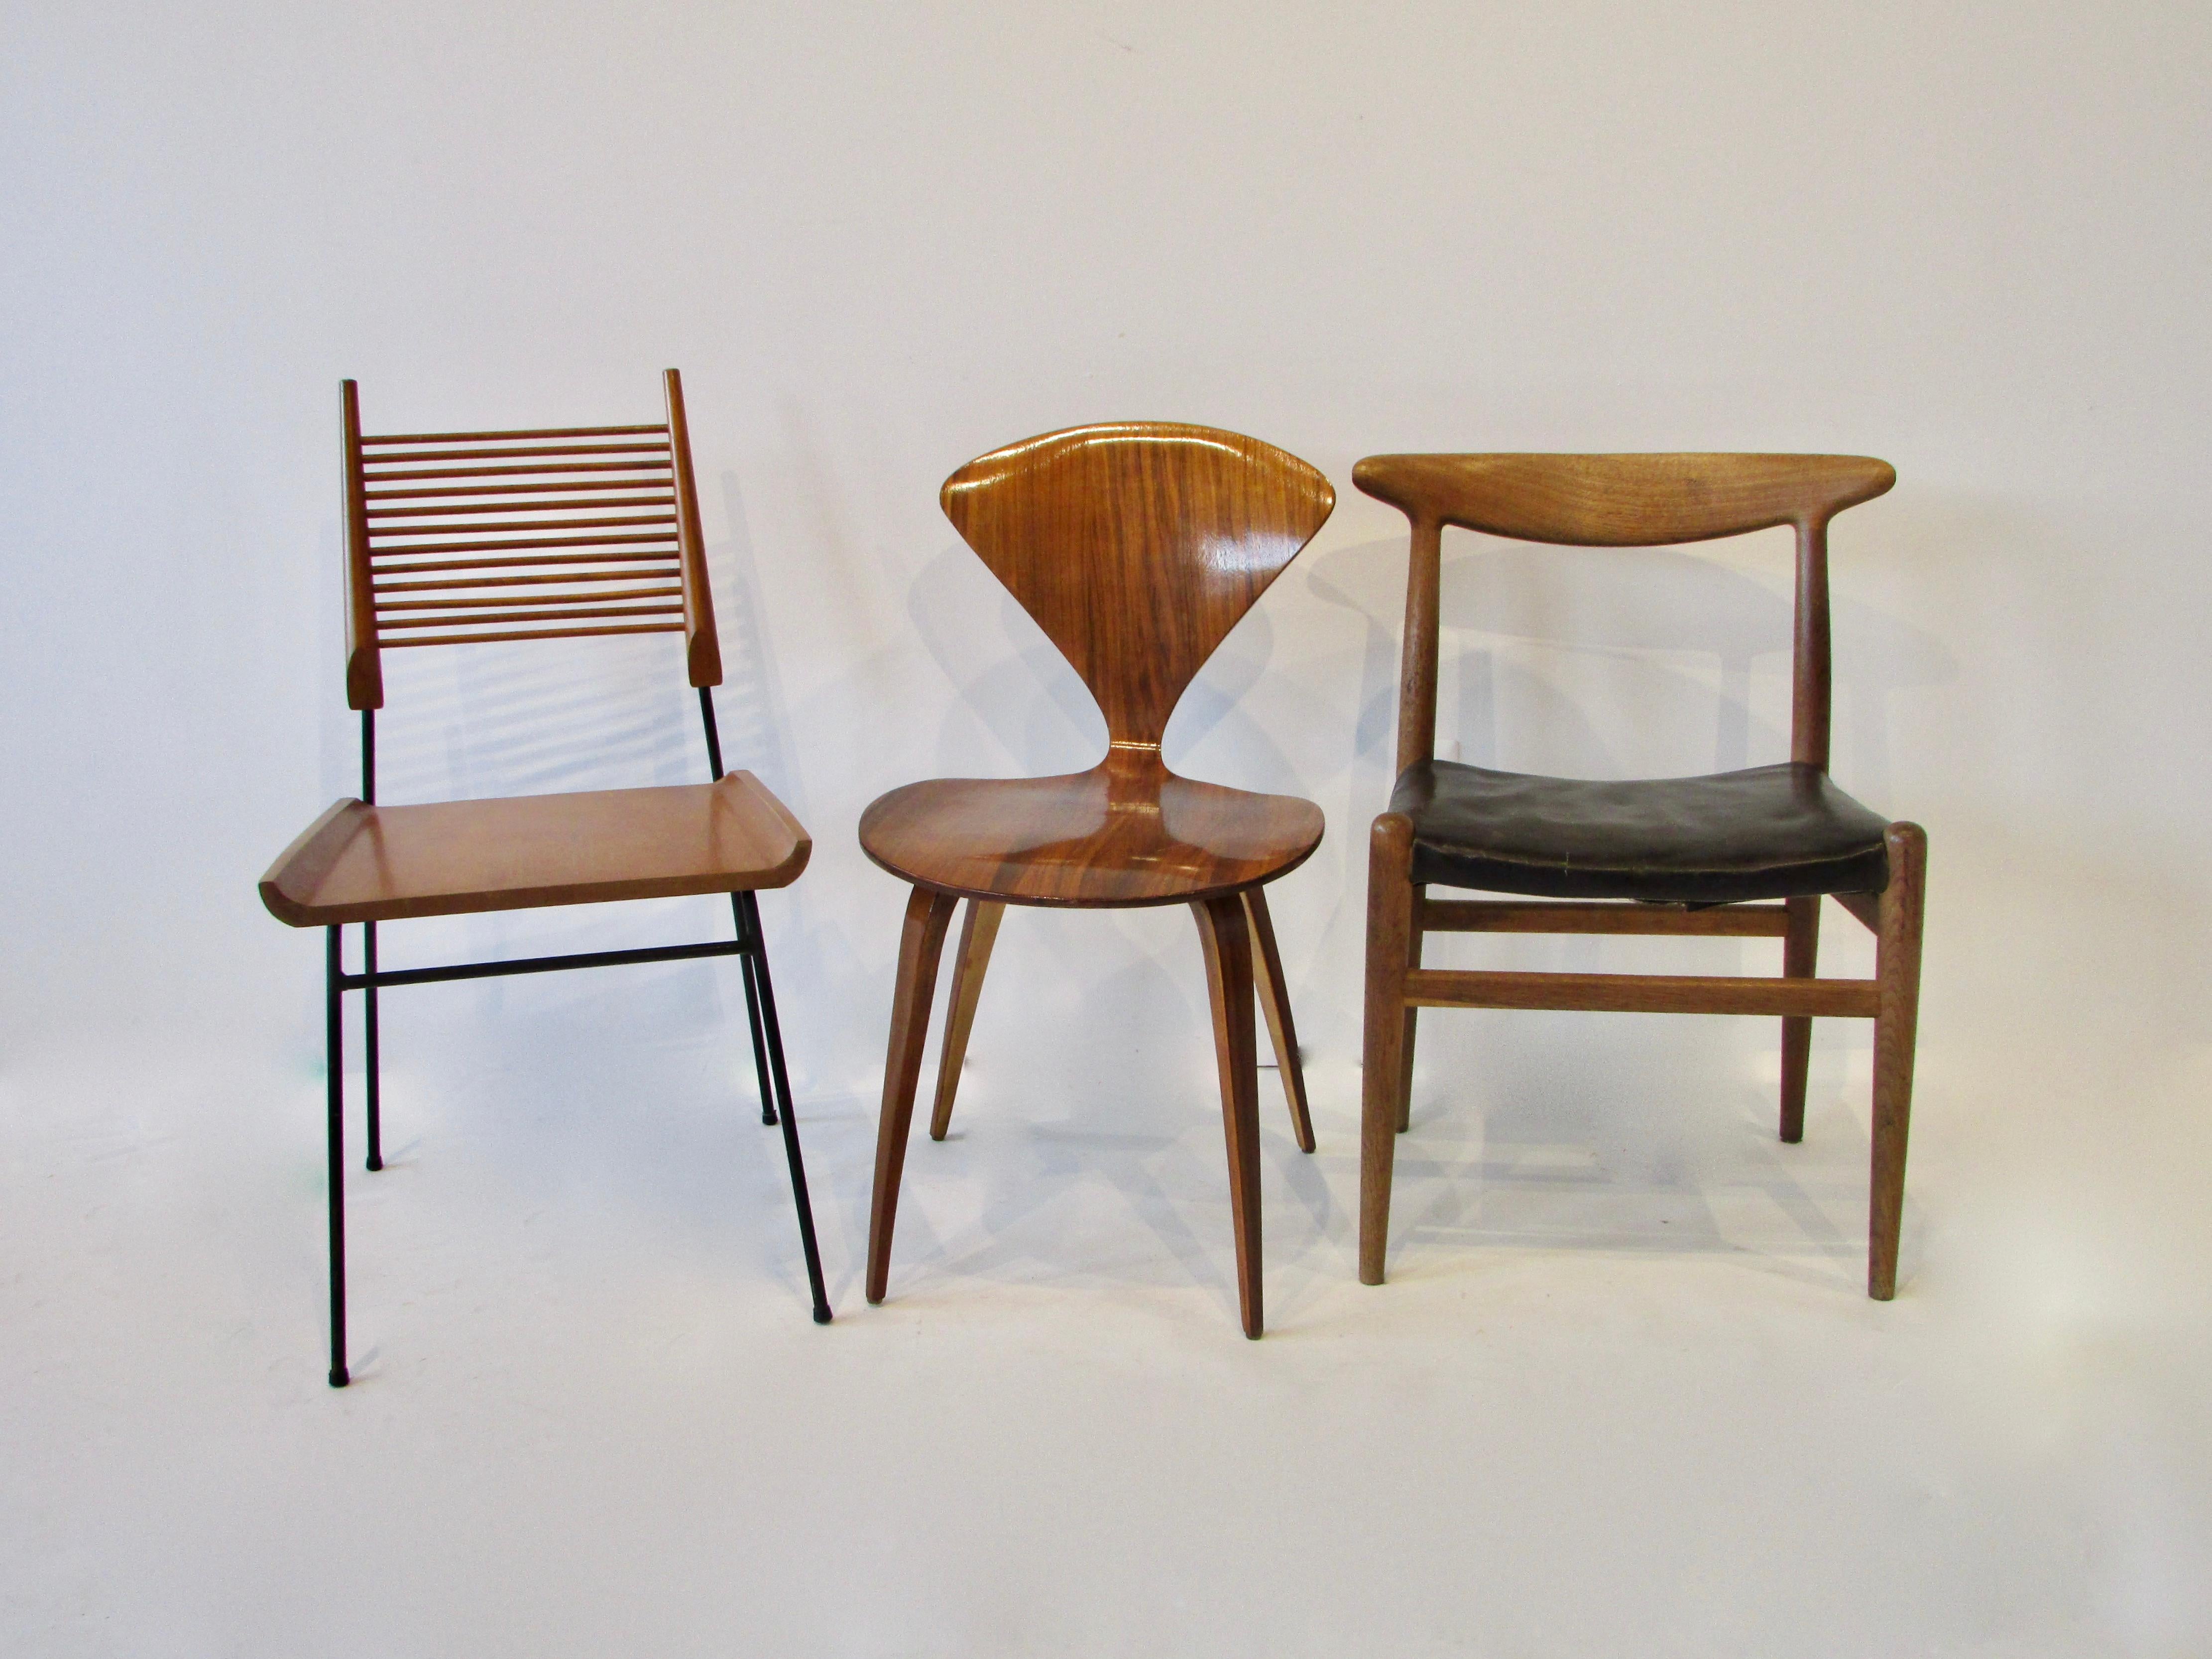 Instant collection six dining chairs by mid century design icons. Paul McCobb Planner Group dowel chair for Winchedon. Eero Saarinen for Knoll, Norman Cherner chair, Harry Bertoia for Knoll wire chair , Charles and Ray Eames fiberglass shell chair